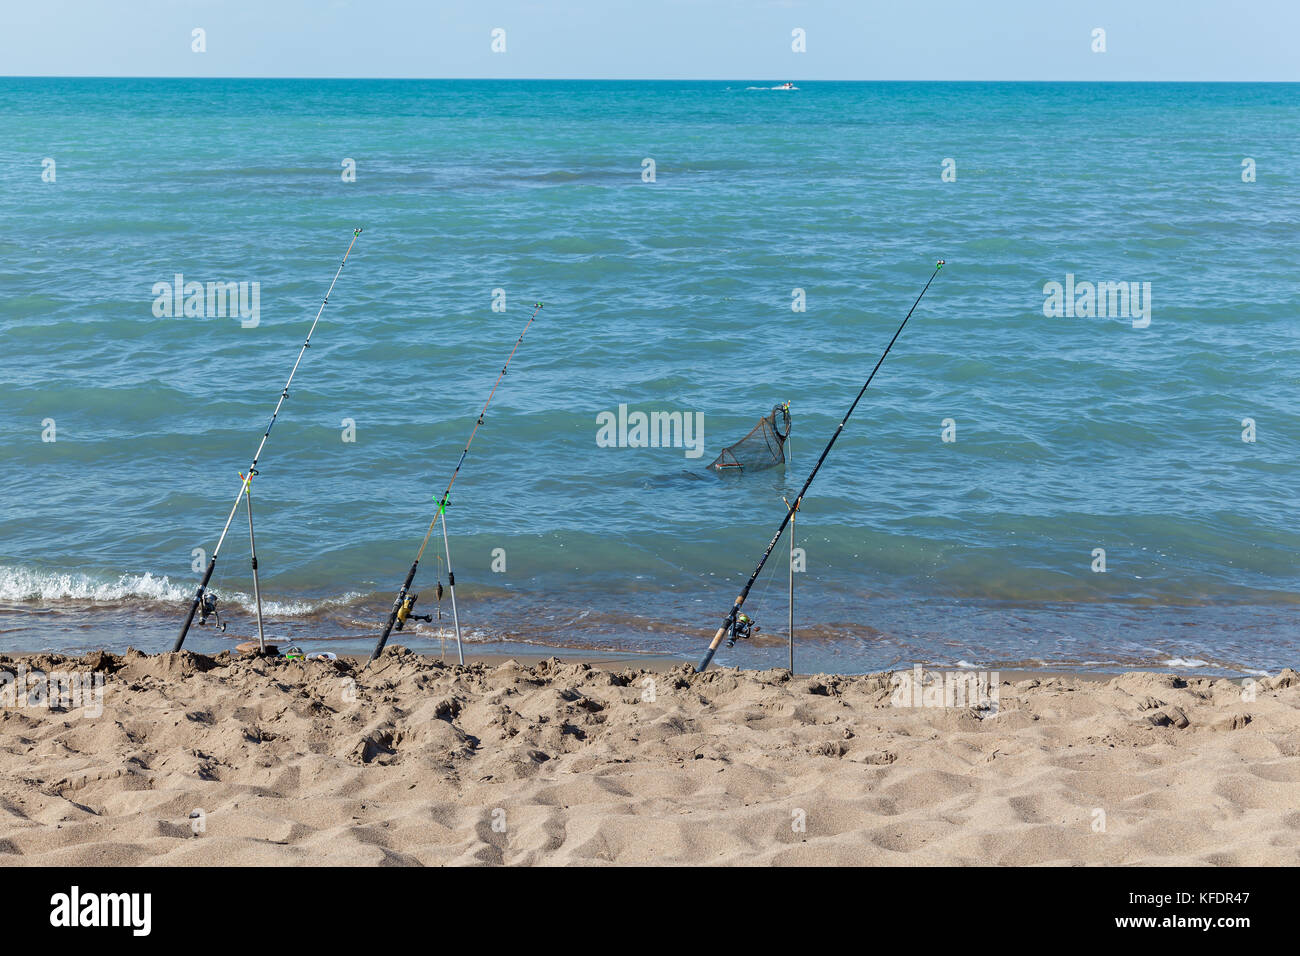 Fishing rods stand on the sandy beach Fixed fishing rod set up on a beach  near the surf on the incoming tide. Blue sky with clouds, turquoise sea  Stock Photo - Alamy